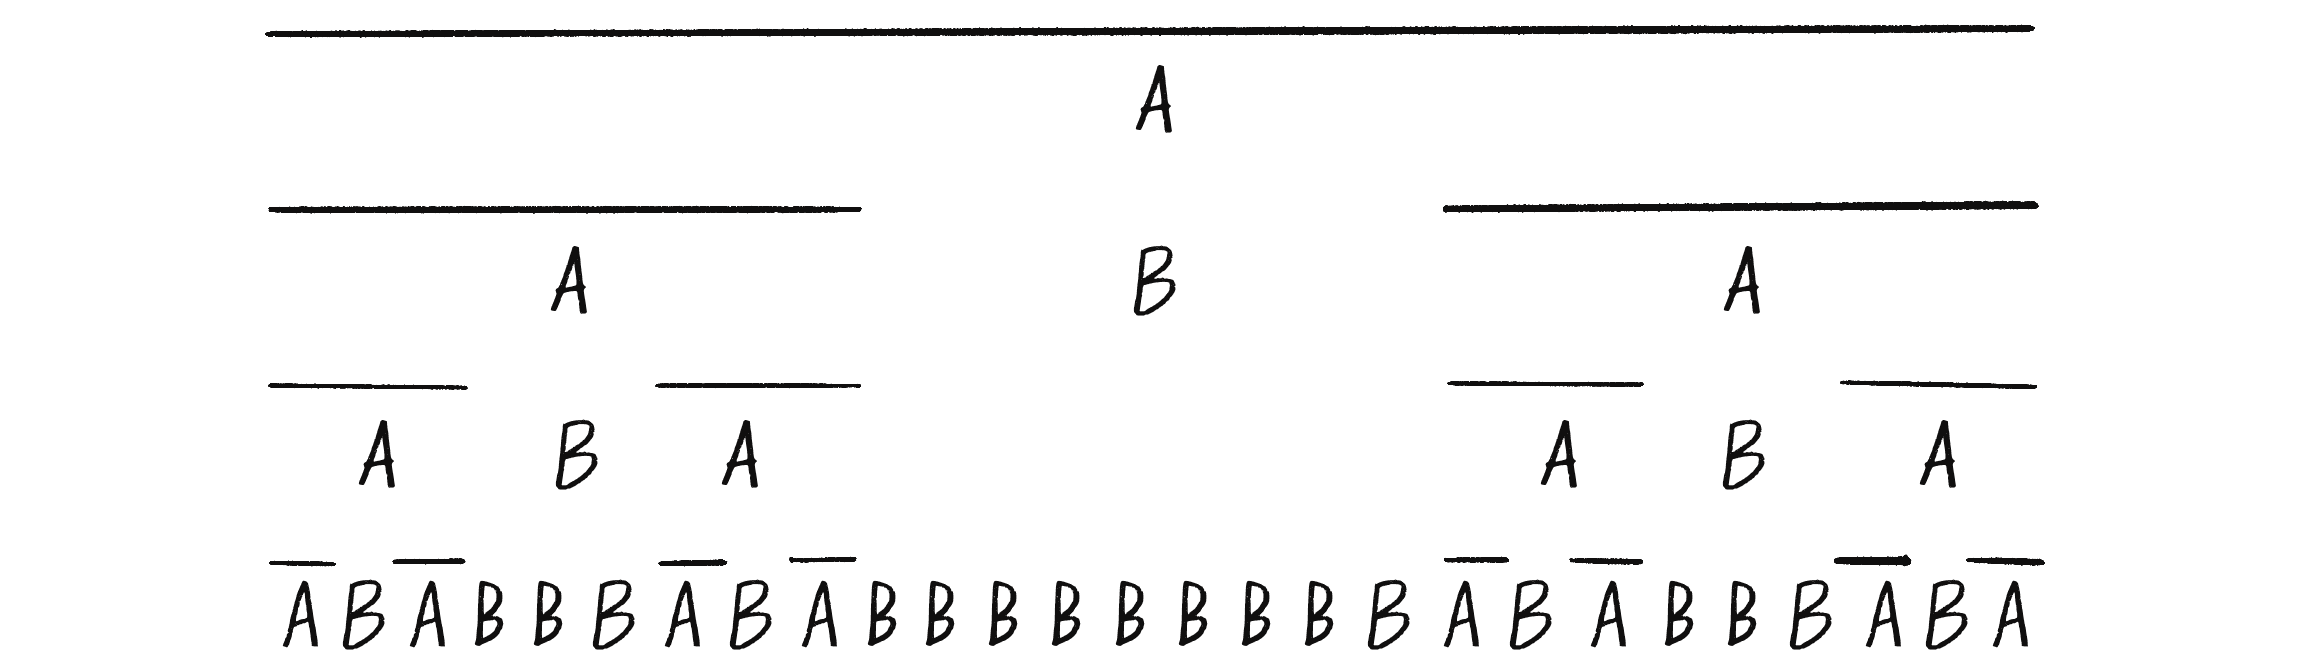 Figure 8.21: The Cantor set as expressed with the alphabet of an L-system